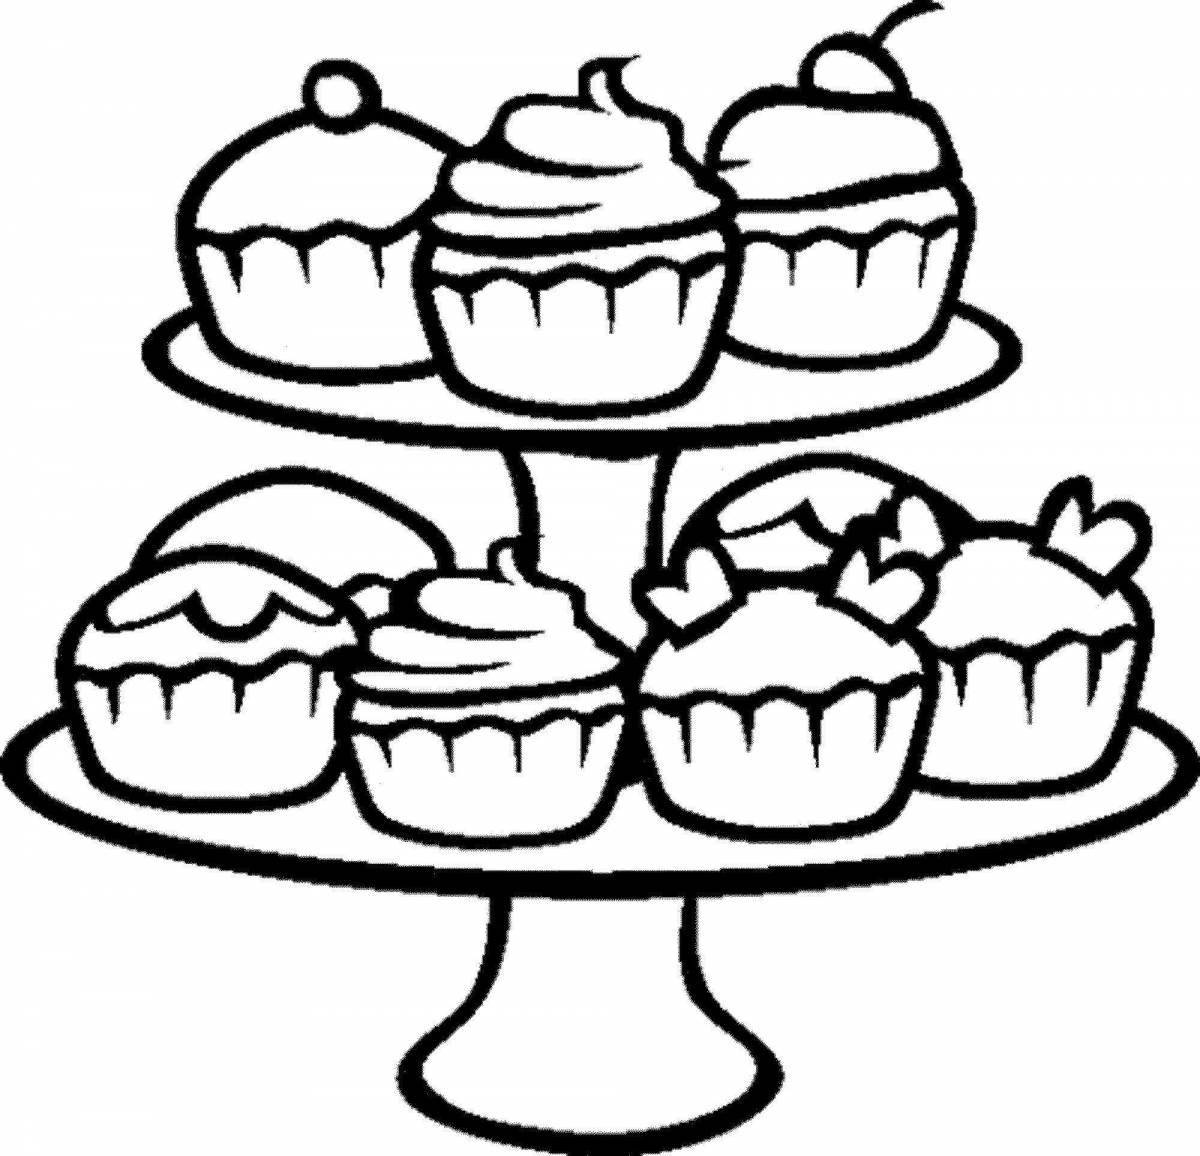 Delicious sweets coloring page